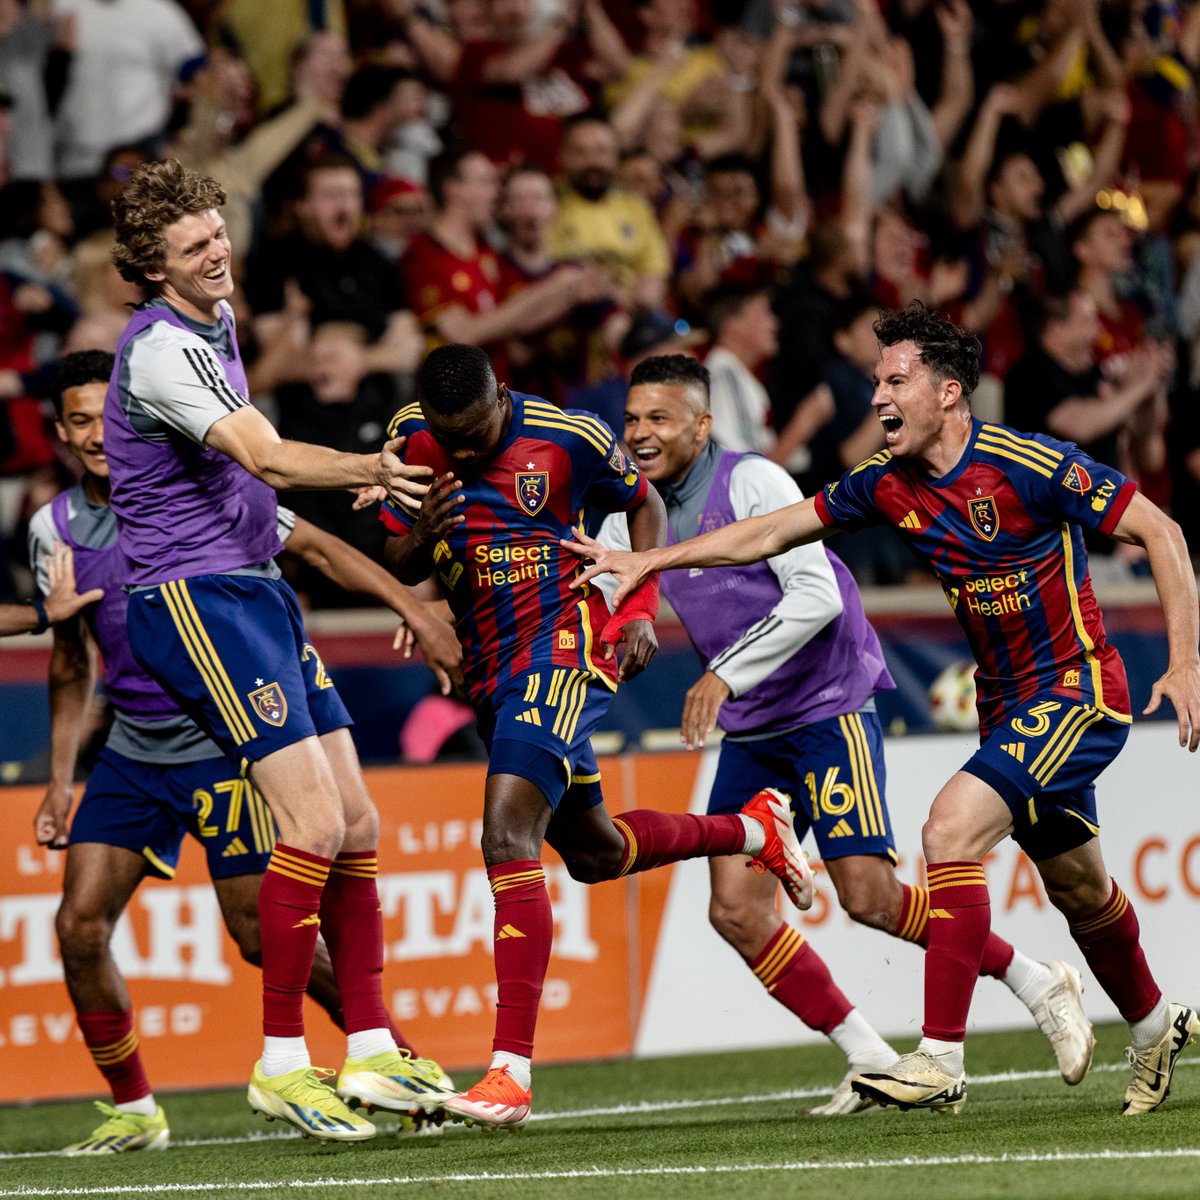 “I think that’s what made this game so special; the eruption after the goals. You felt it in your soul.”

@realsaltlake showed repeated resilience to win an eight-goal thriller over Colorado: soc.cr/4asoIjY

#RivalryWeek by @continentaltire